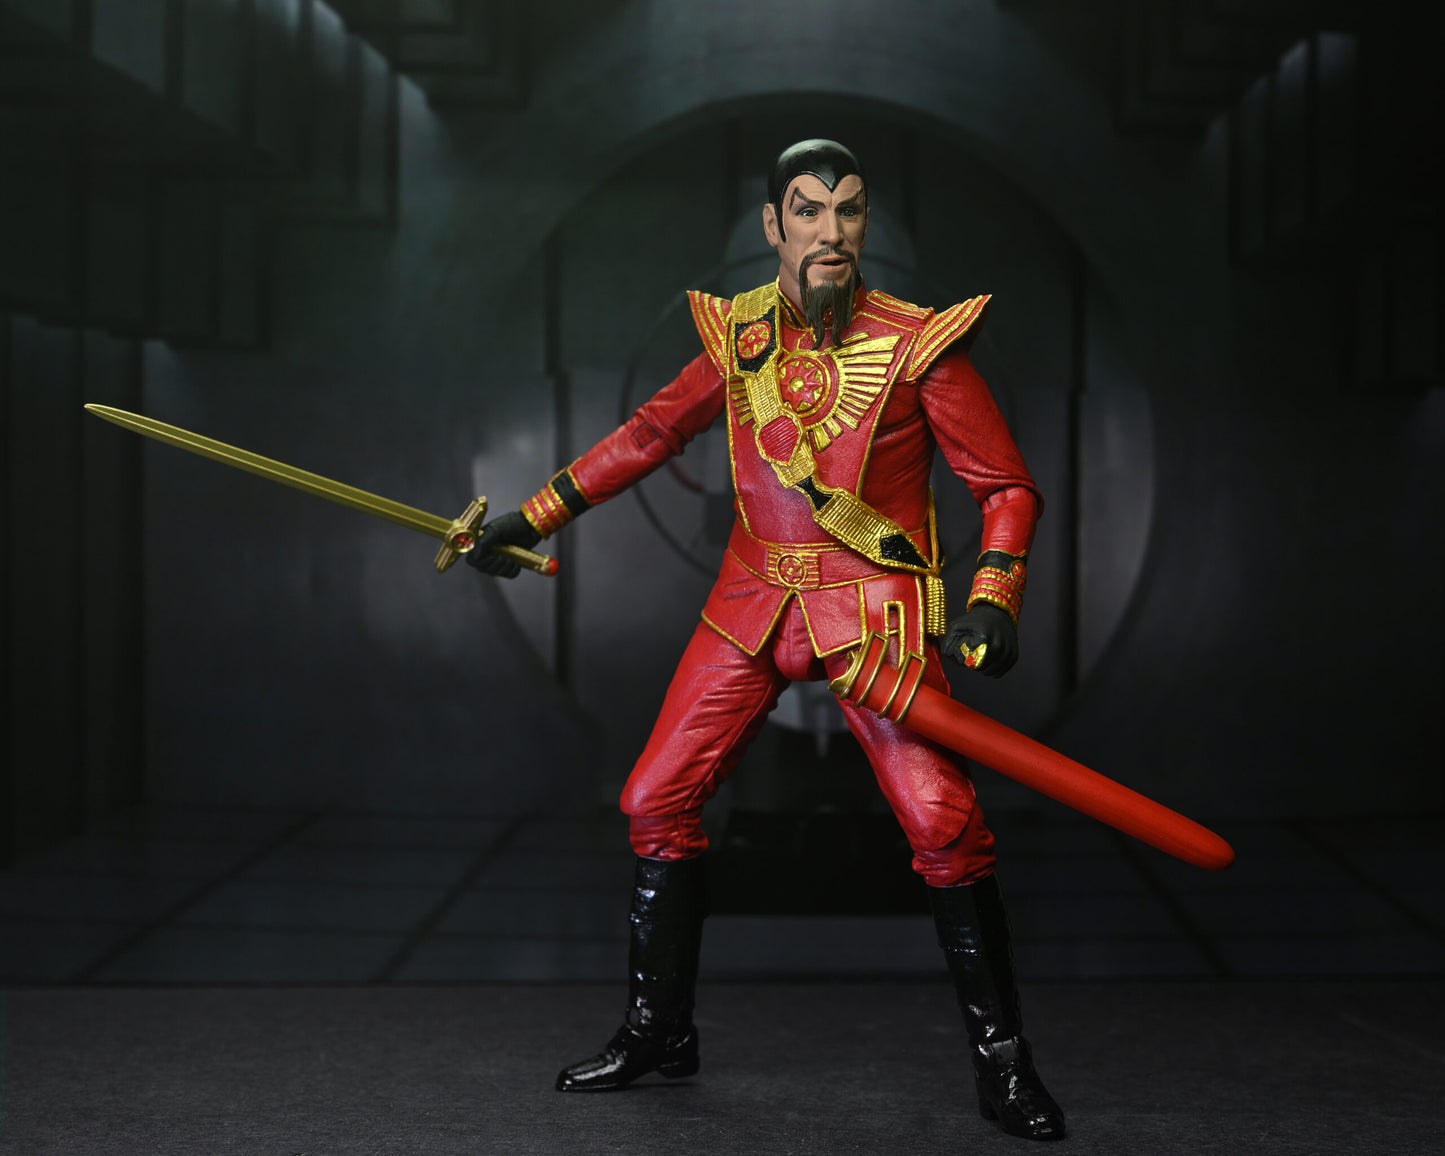 Flash Gordon (1980)

7” Scale Action Figure – Ultimate Ming (Red Military Outfit)